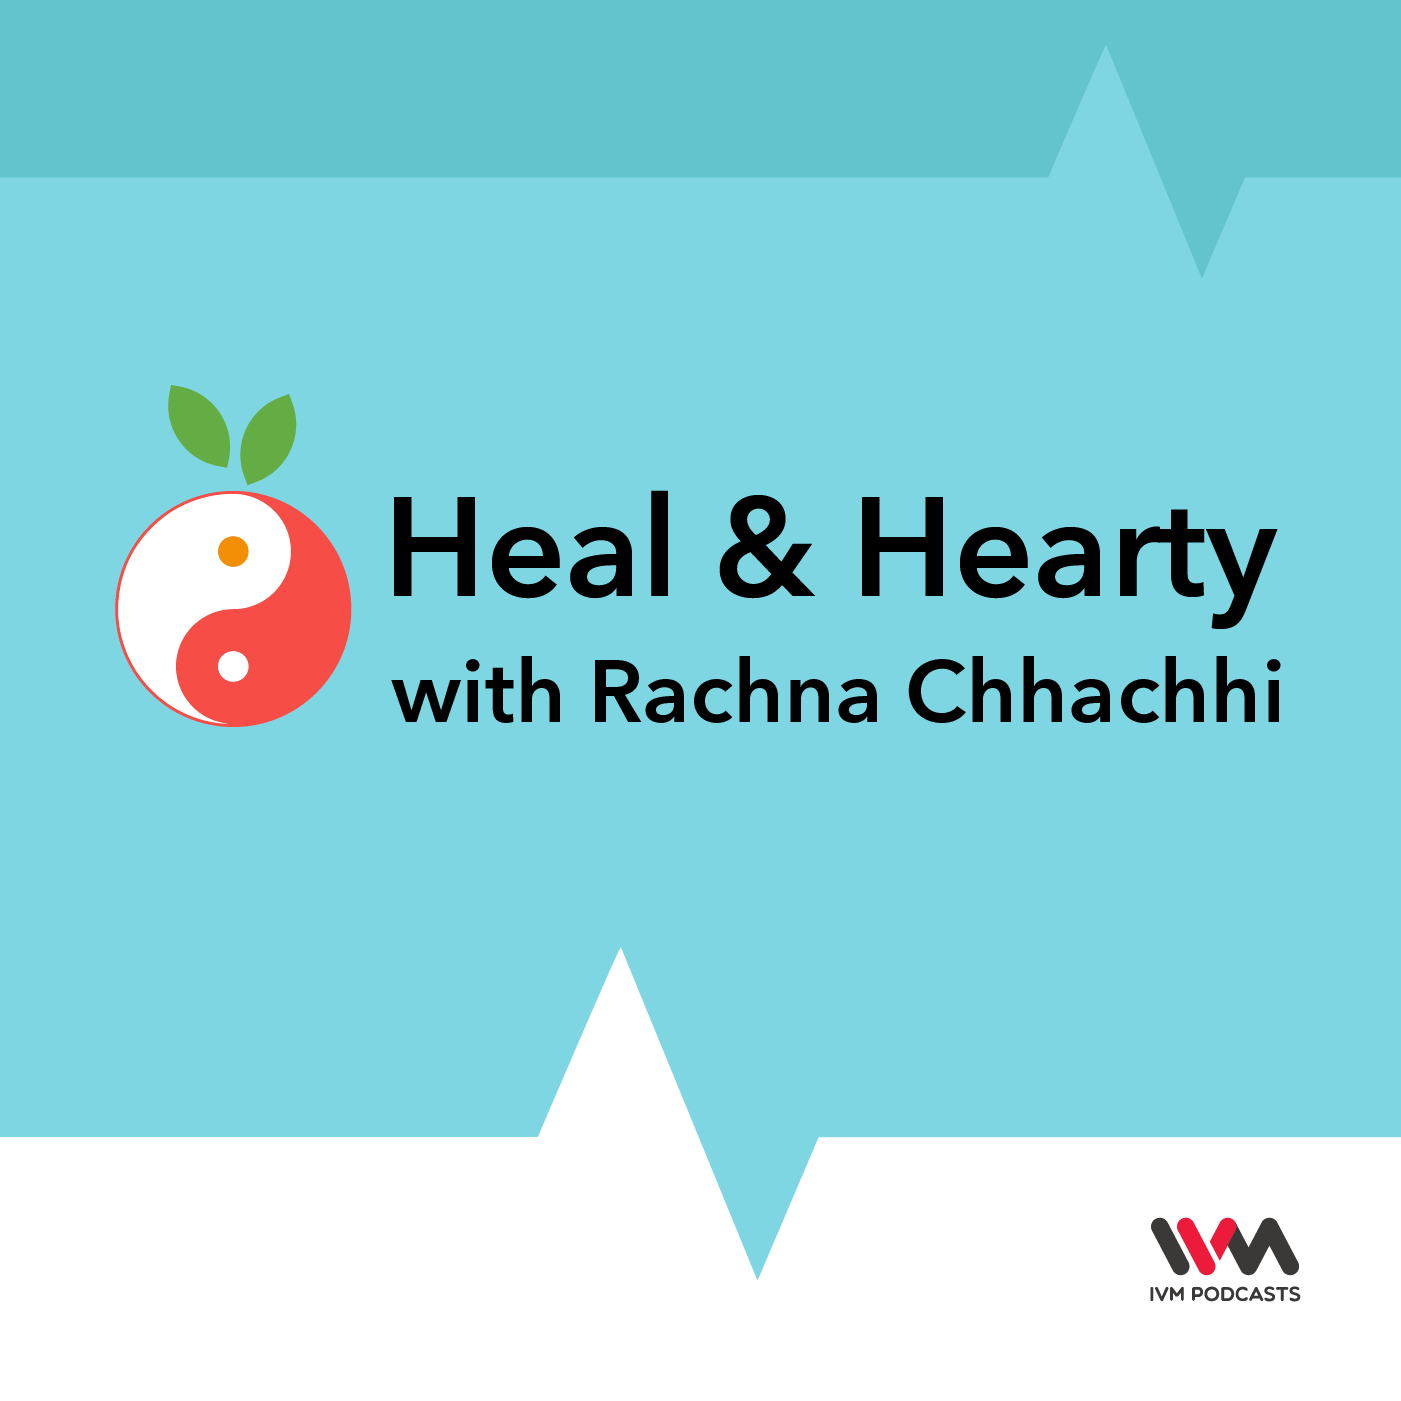 Ep. 00: Introduction to Heal & Hearty